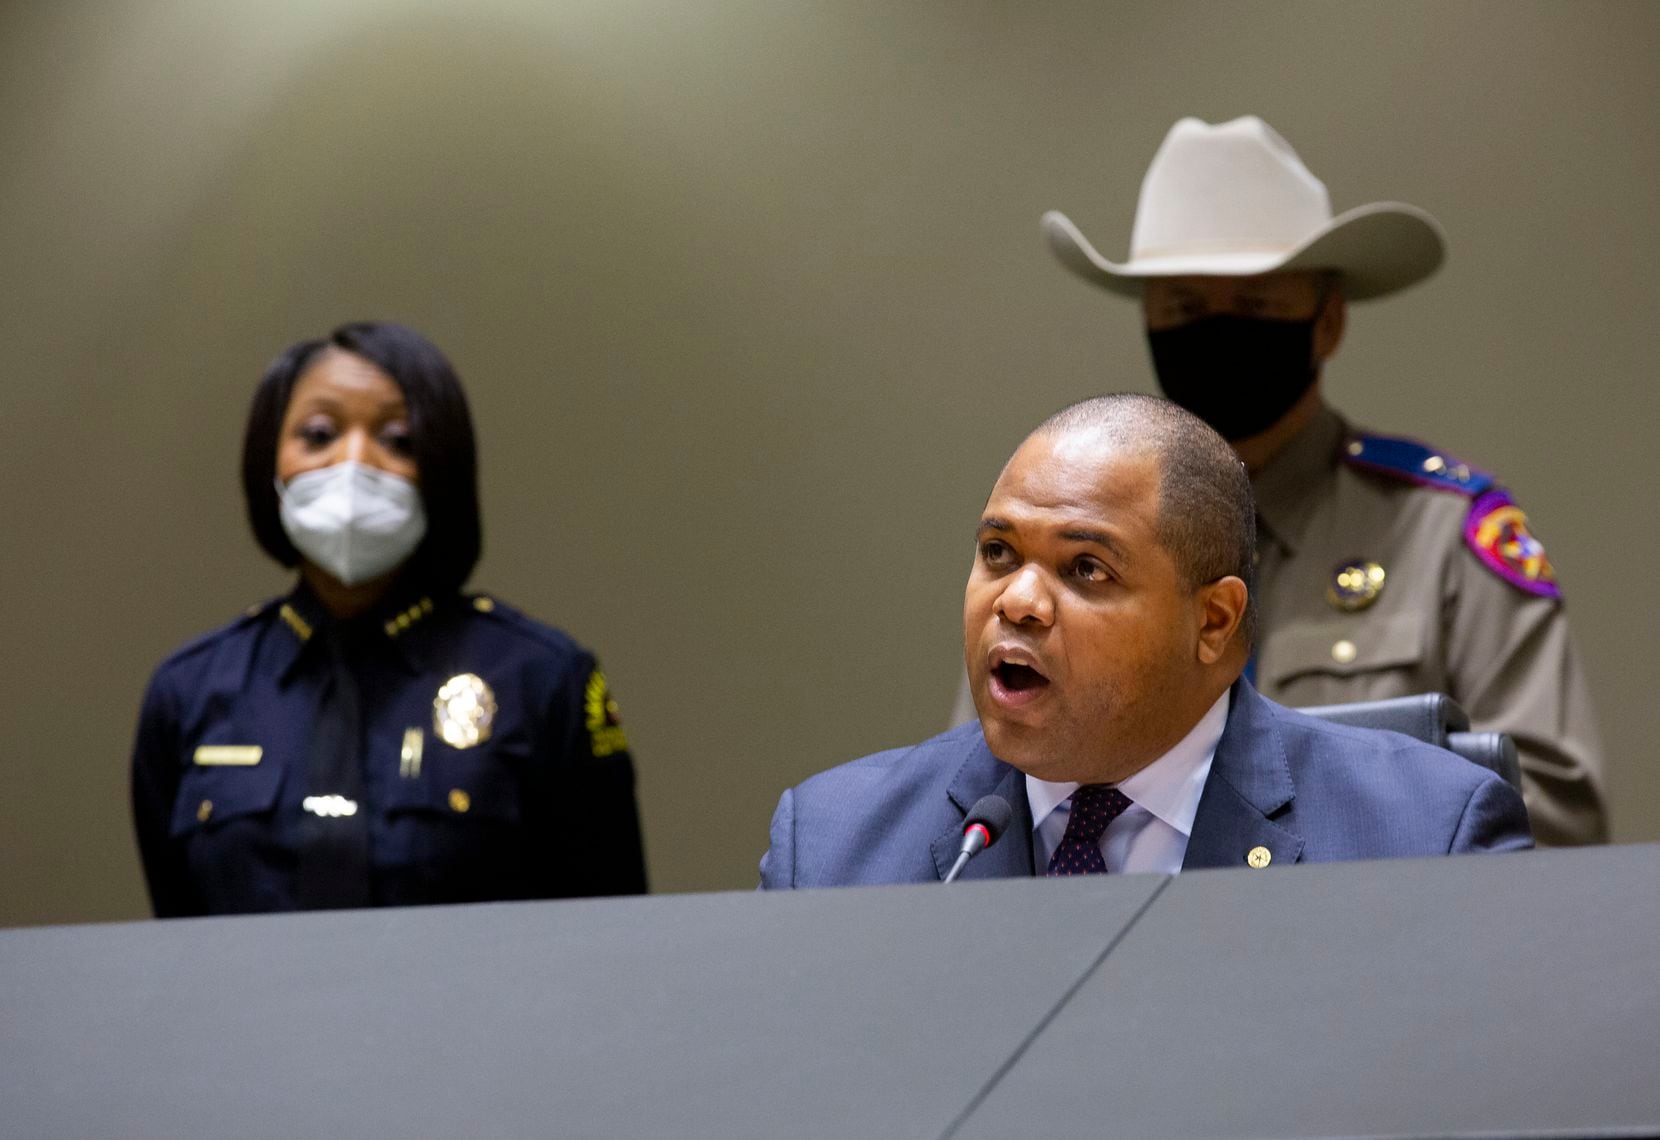 “It is clearly, clearly not in the best interests of the city in the middle of a violent crime uptick to be defunding the police," Dallas Mayor Eric Johnson says of a City Council proposal to cut $7 million from the Police Department's overtime budget.